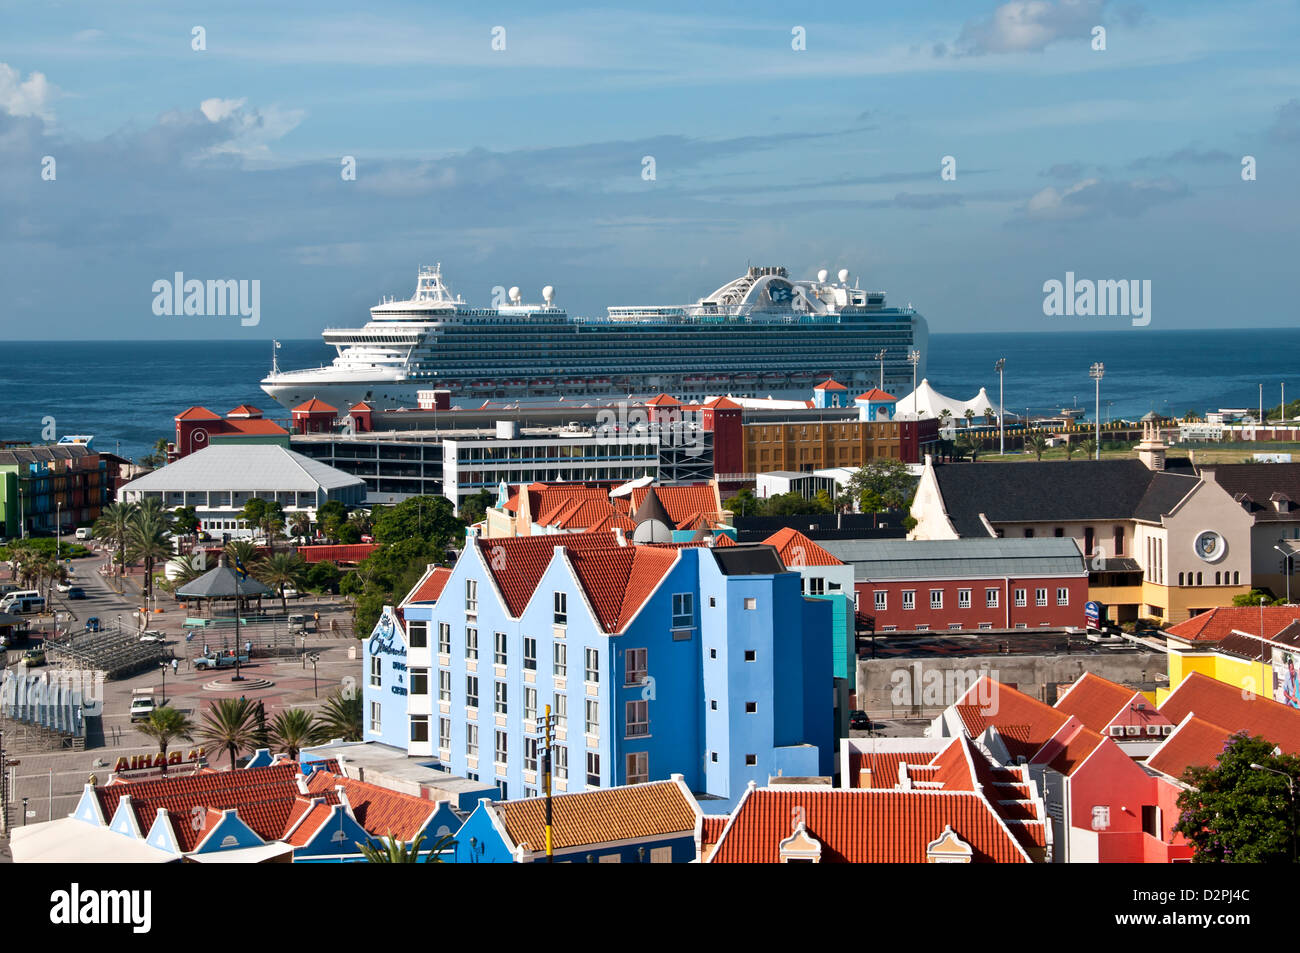 Above view of Otrobanda side of Willemstad, Curacao showing Dutch architecture and cruise ship at dock Stock Photo